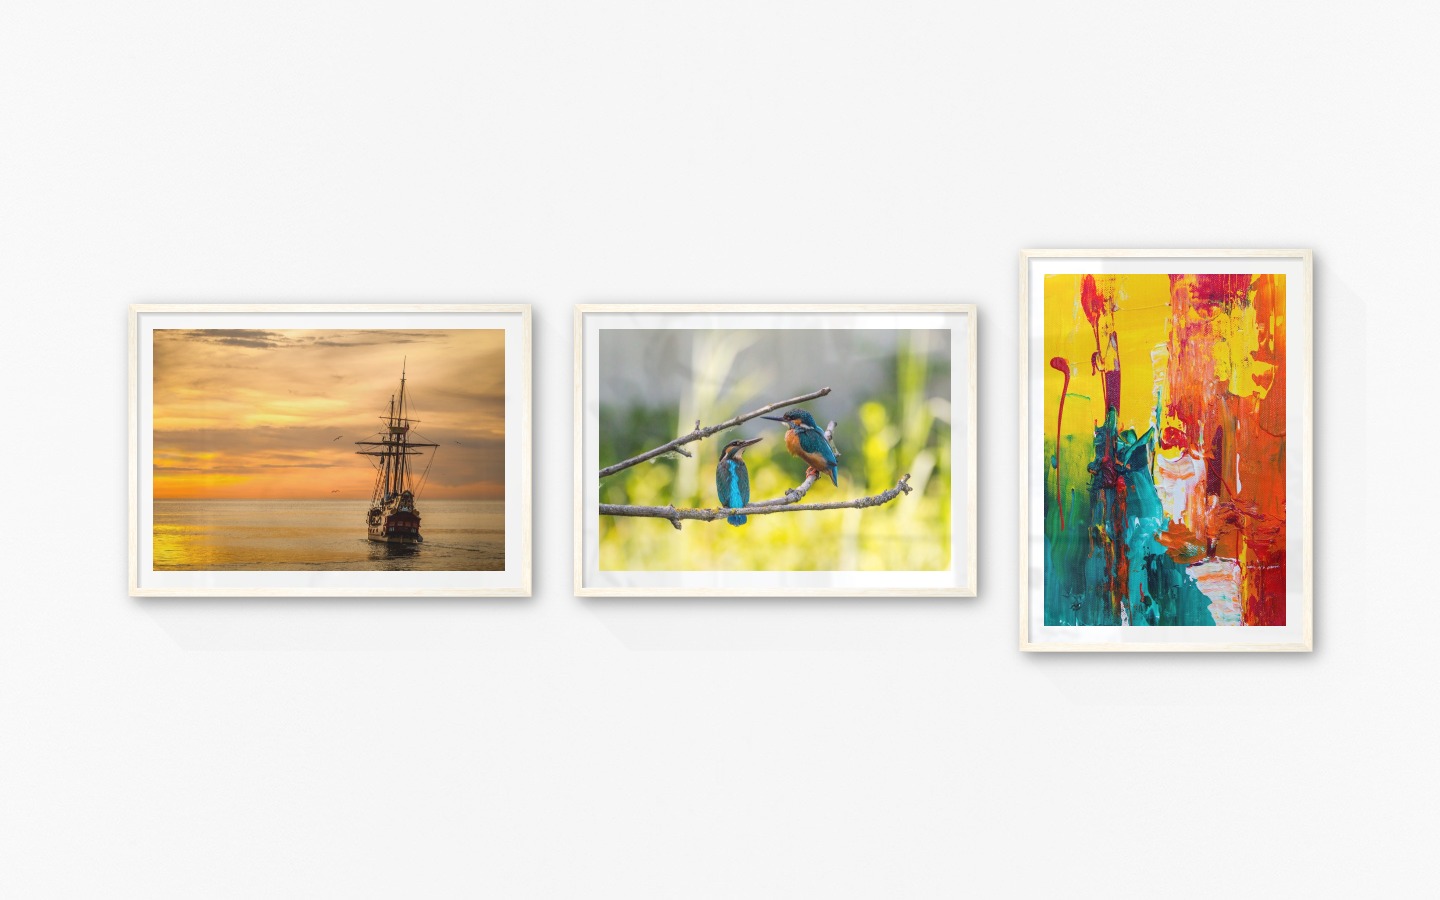 Gallery wall with picture frames in light wood in sizes 50x70 with prints "Ships at sea", "Hummingbirds" and "Abstract art 5"